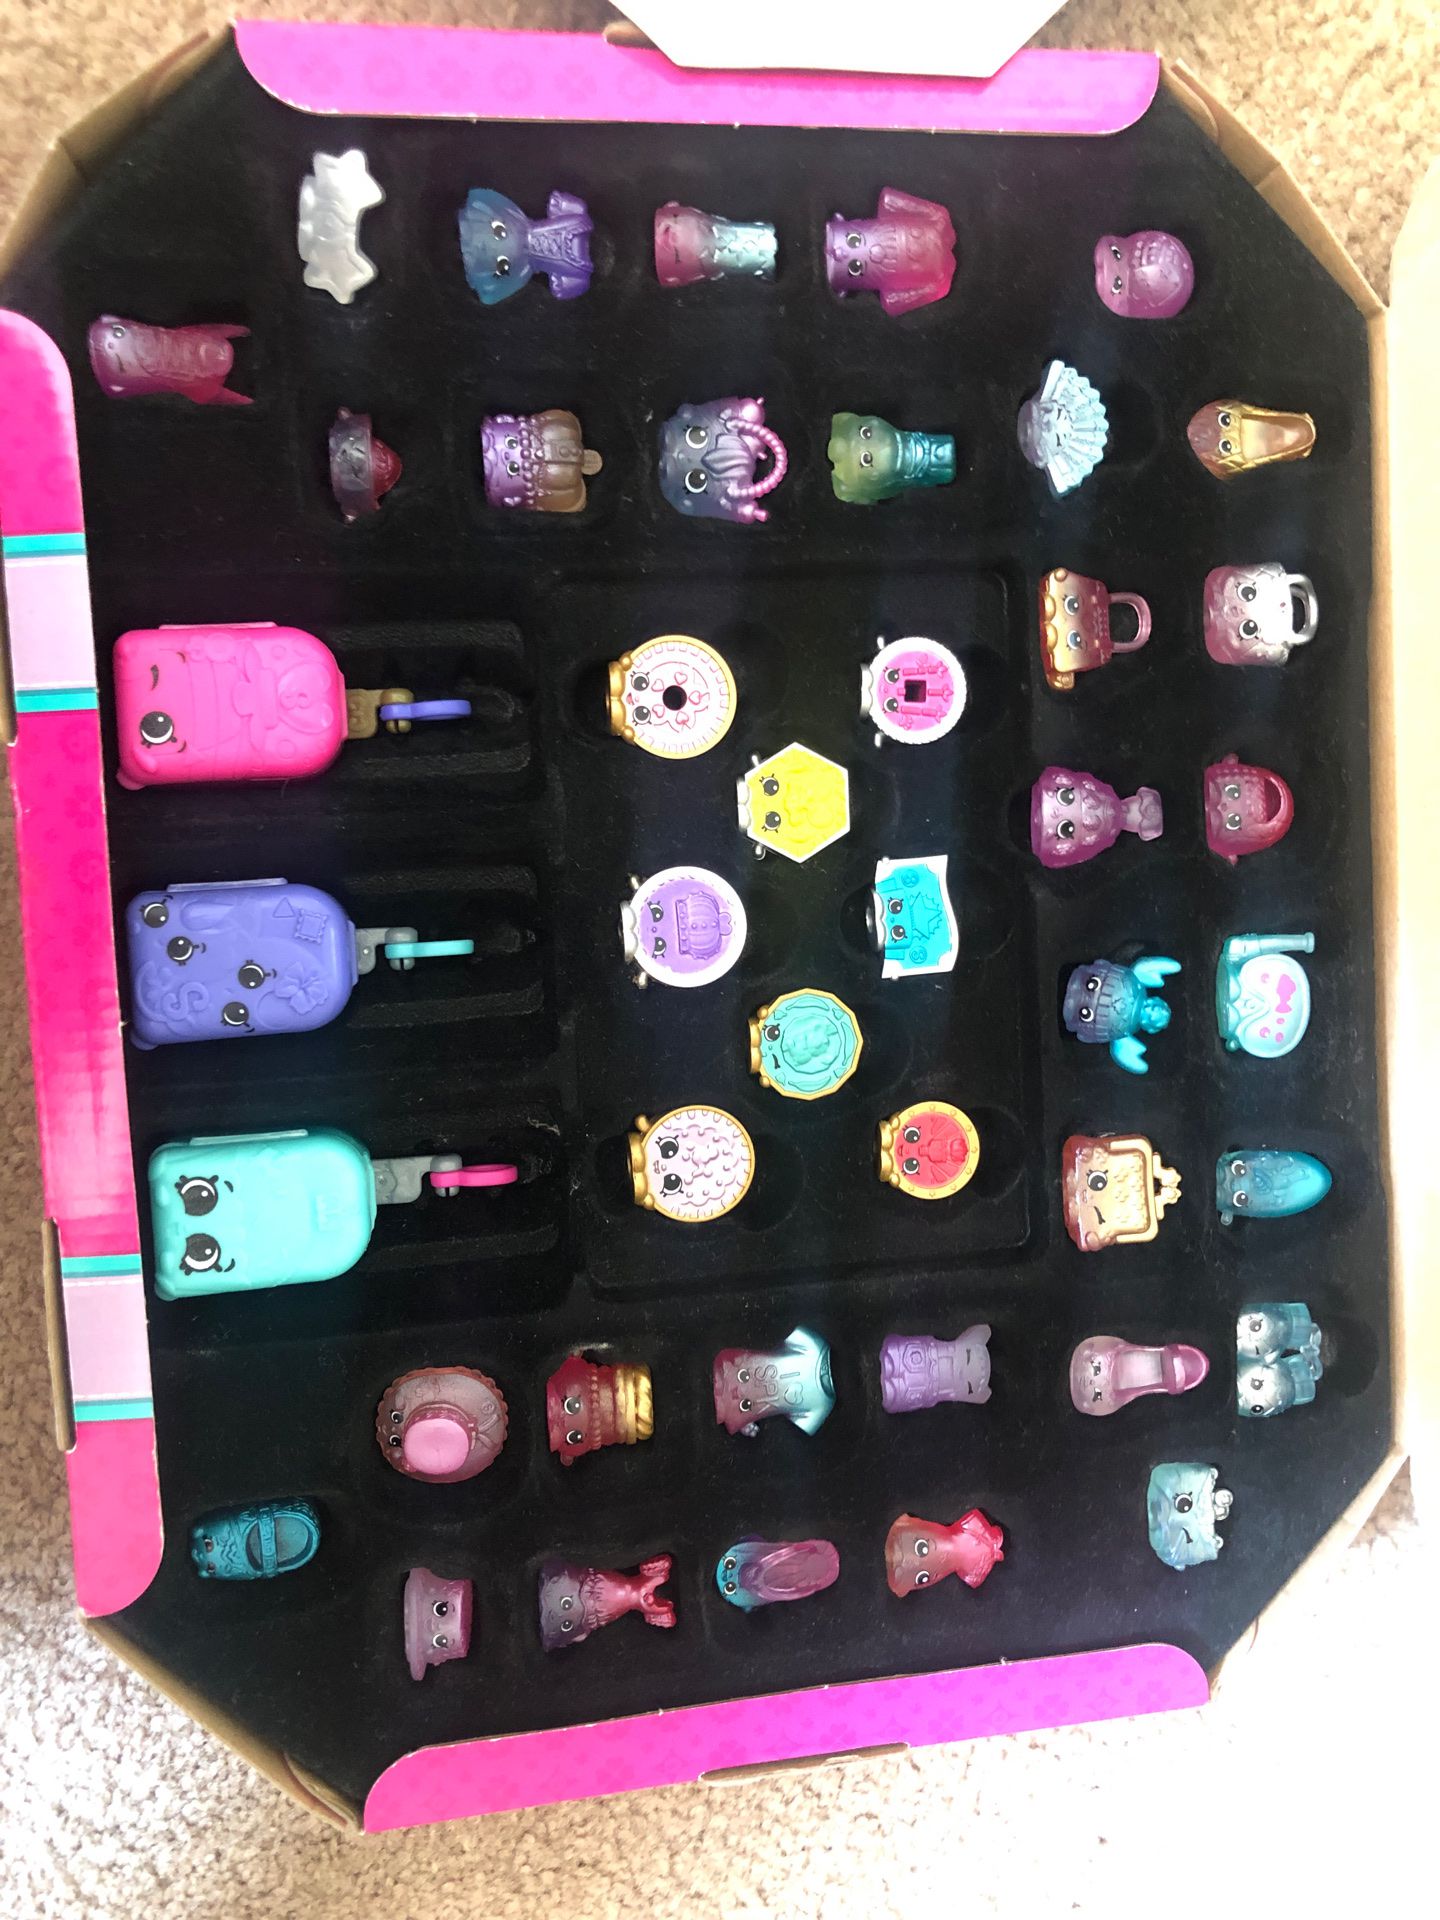 The Lost luggage shopkins/ 8 exclusive never released shopkins!!